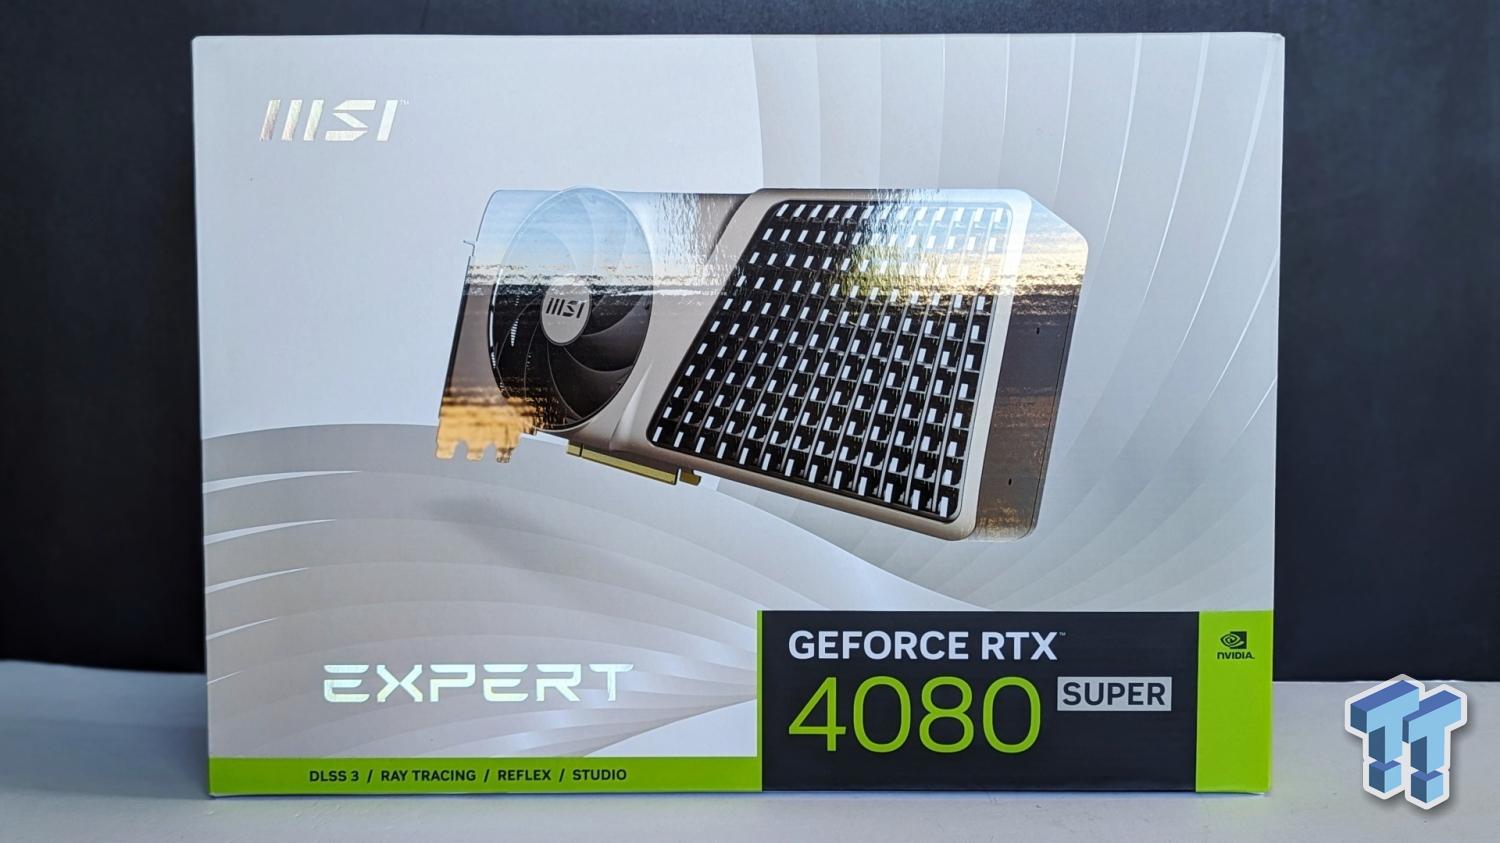 MSI GeForce RTX 4080 SUPER EXPERT Review